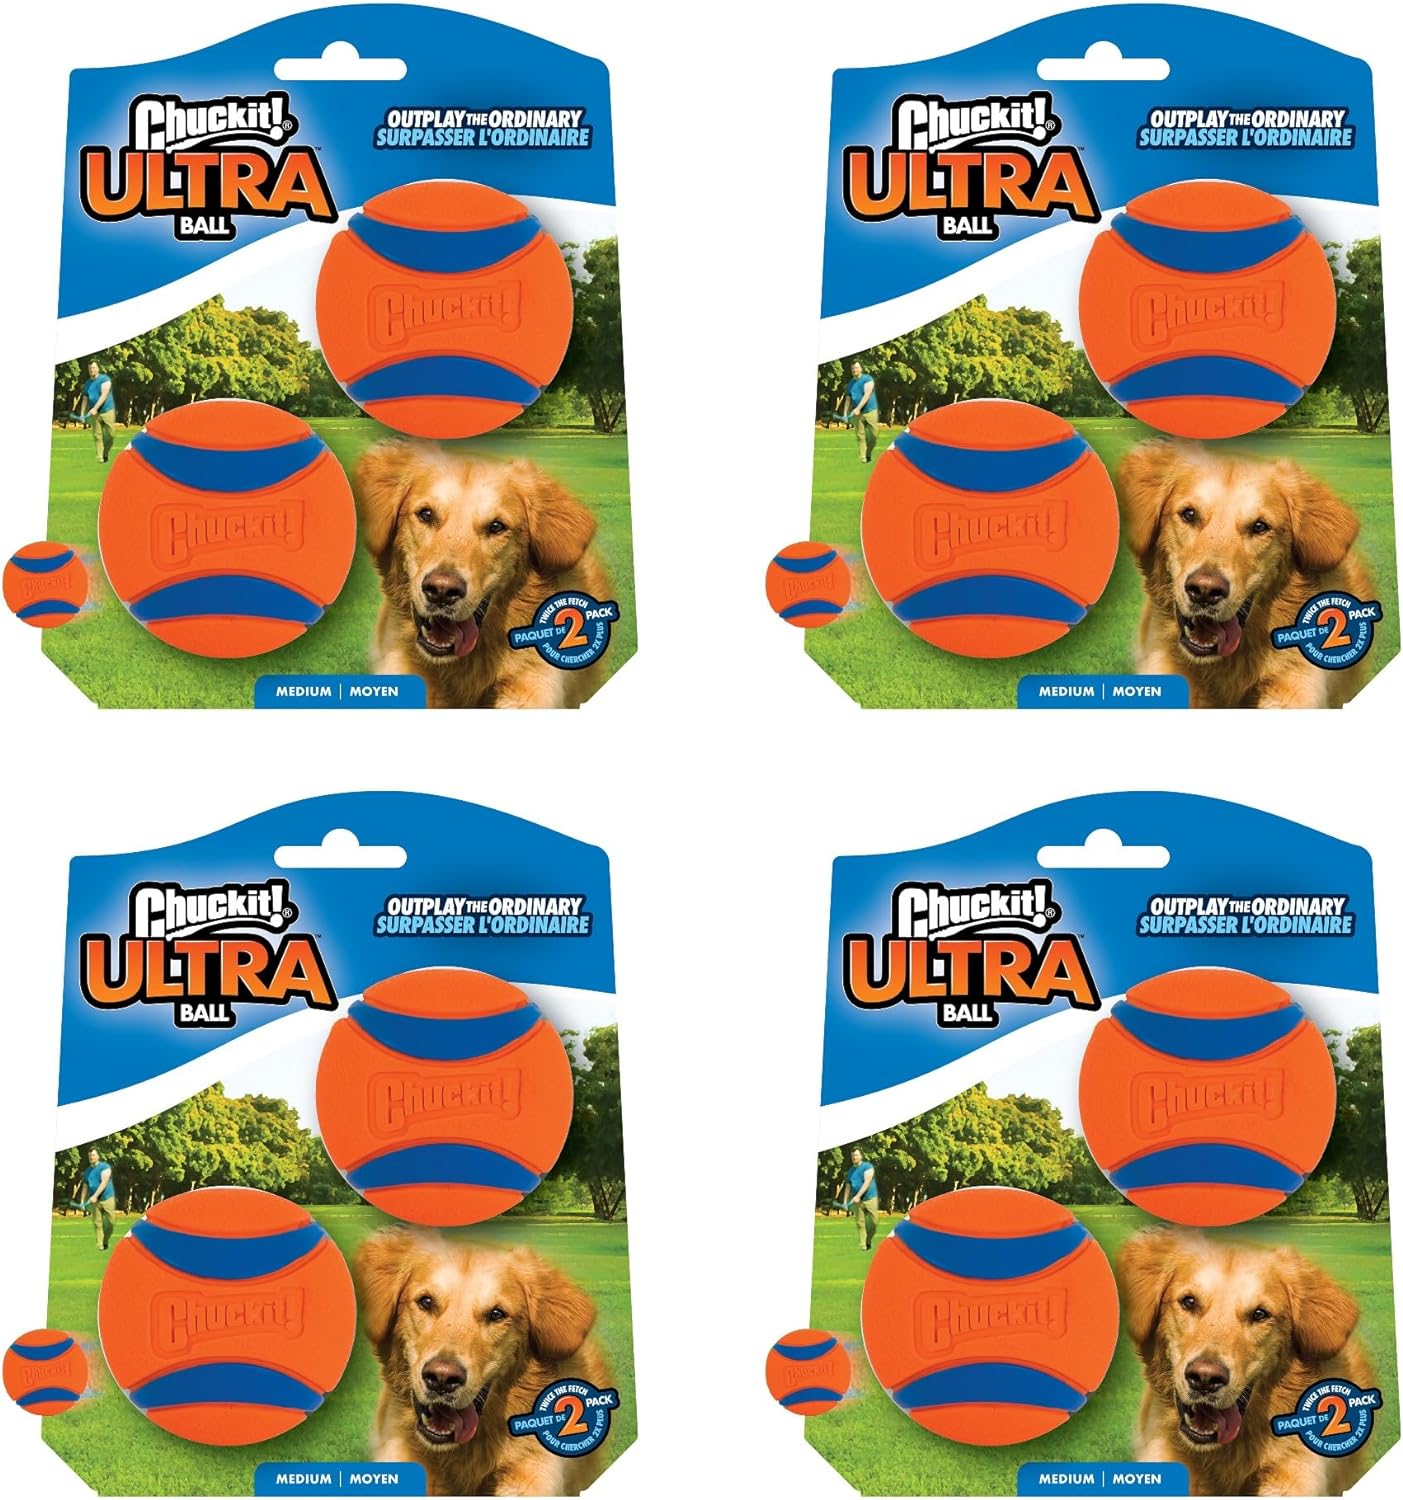 Chuckit! Ultra Ball Dog Toy, Medium (2.5" Diameter), Pack of 8 with Chuckit Cleaning Bucket